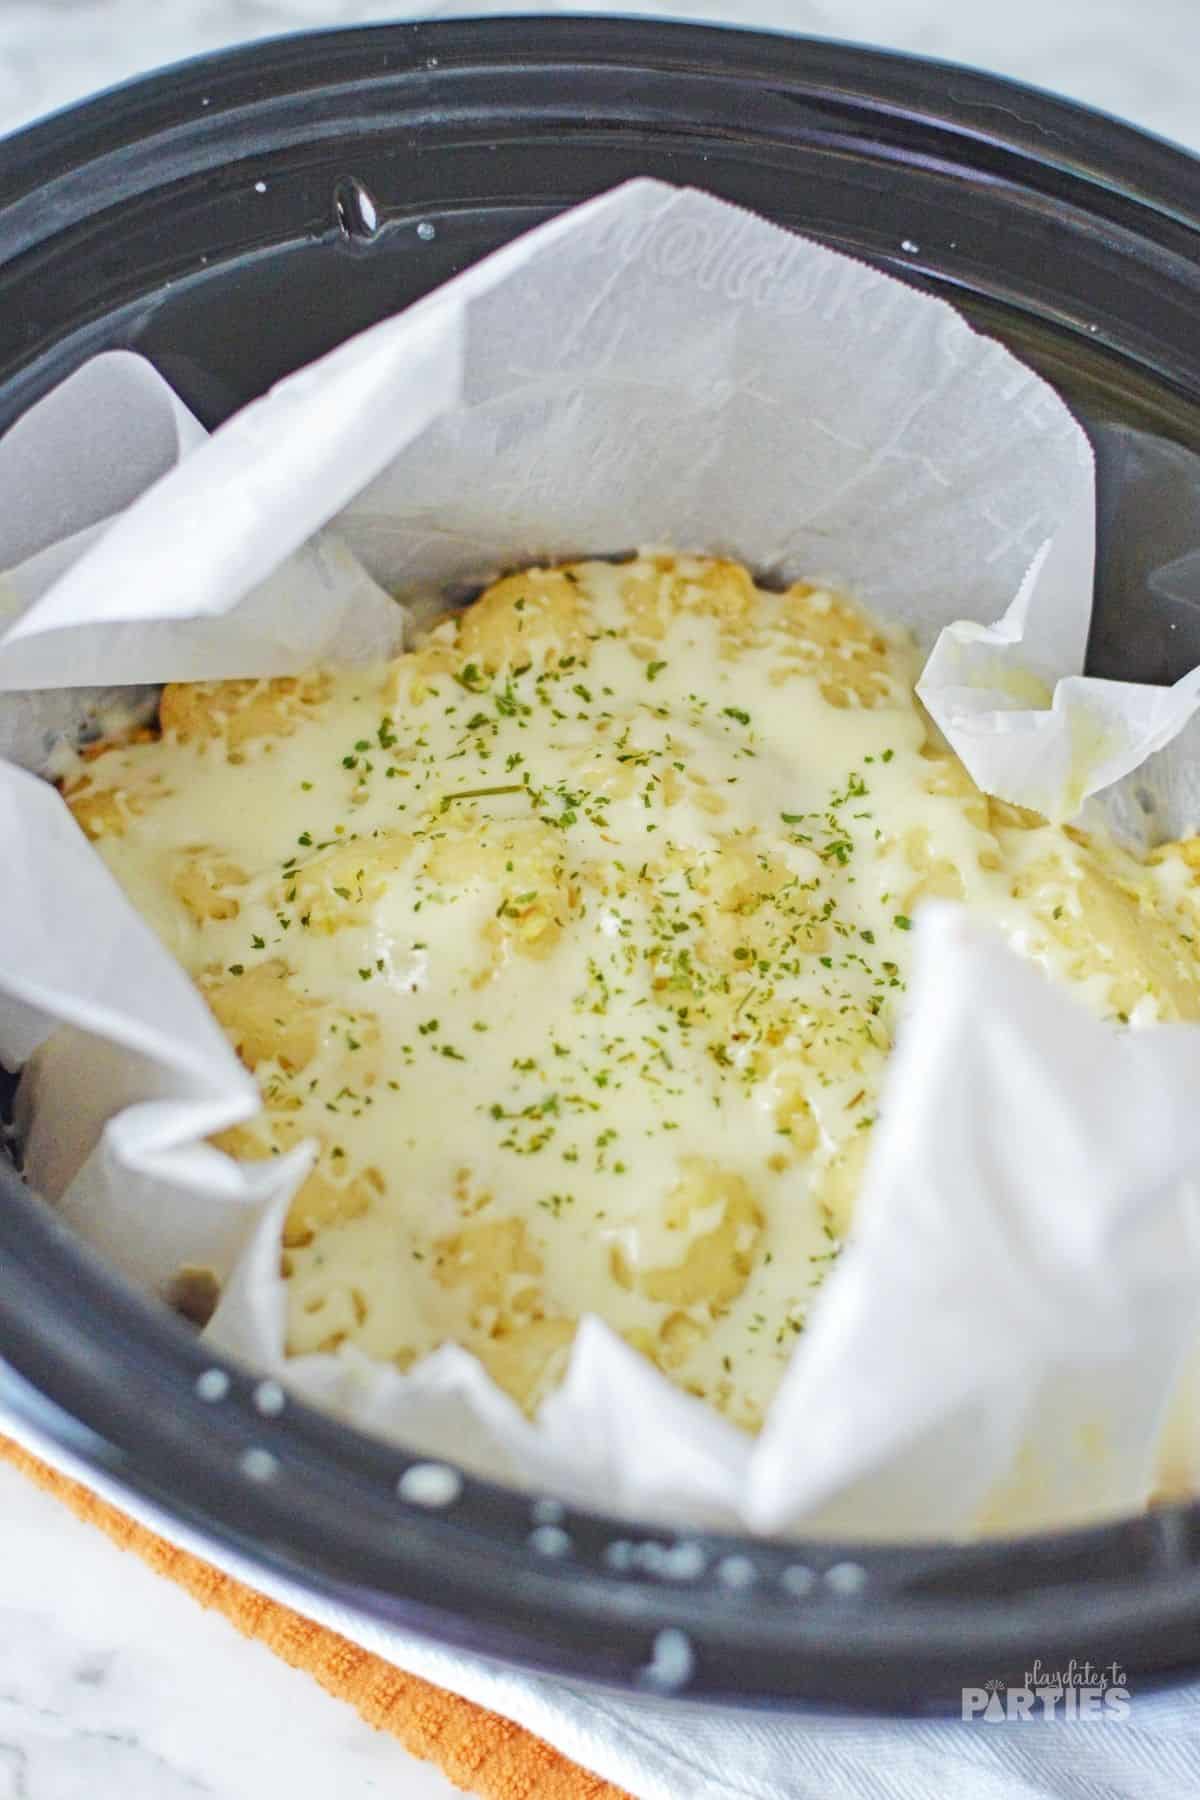 A slow cooker with cheesy bread as an appetizer.